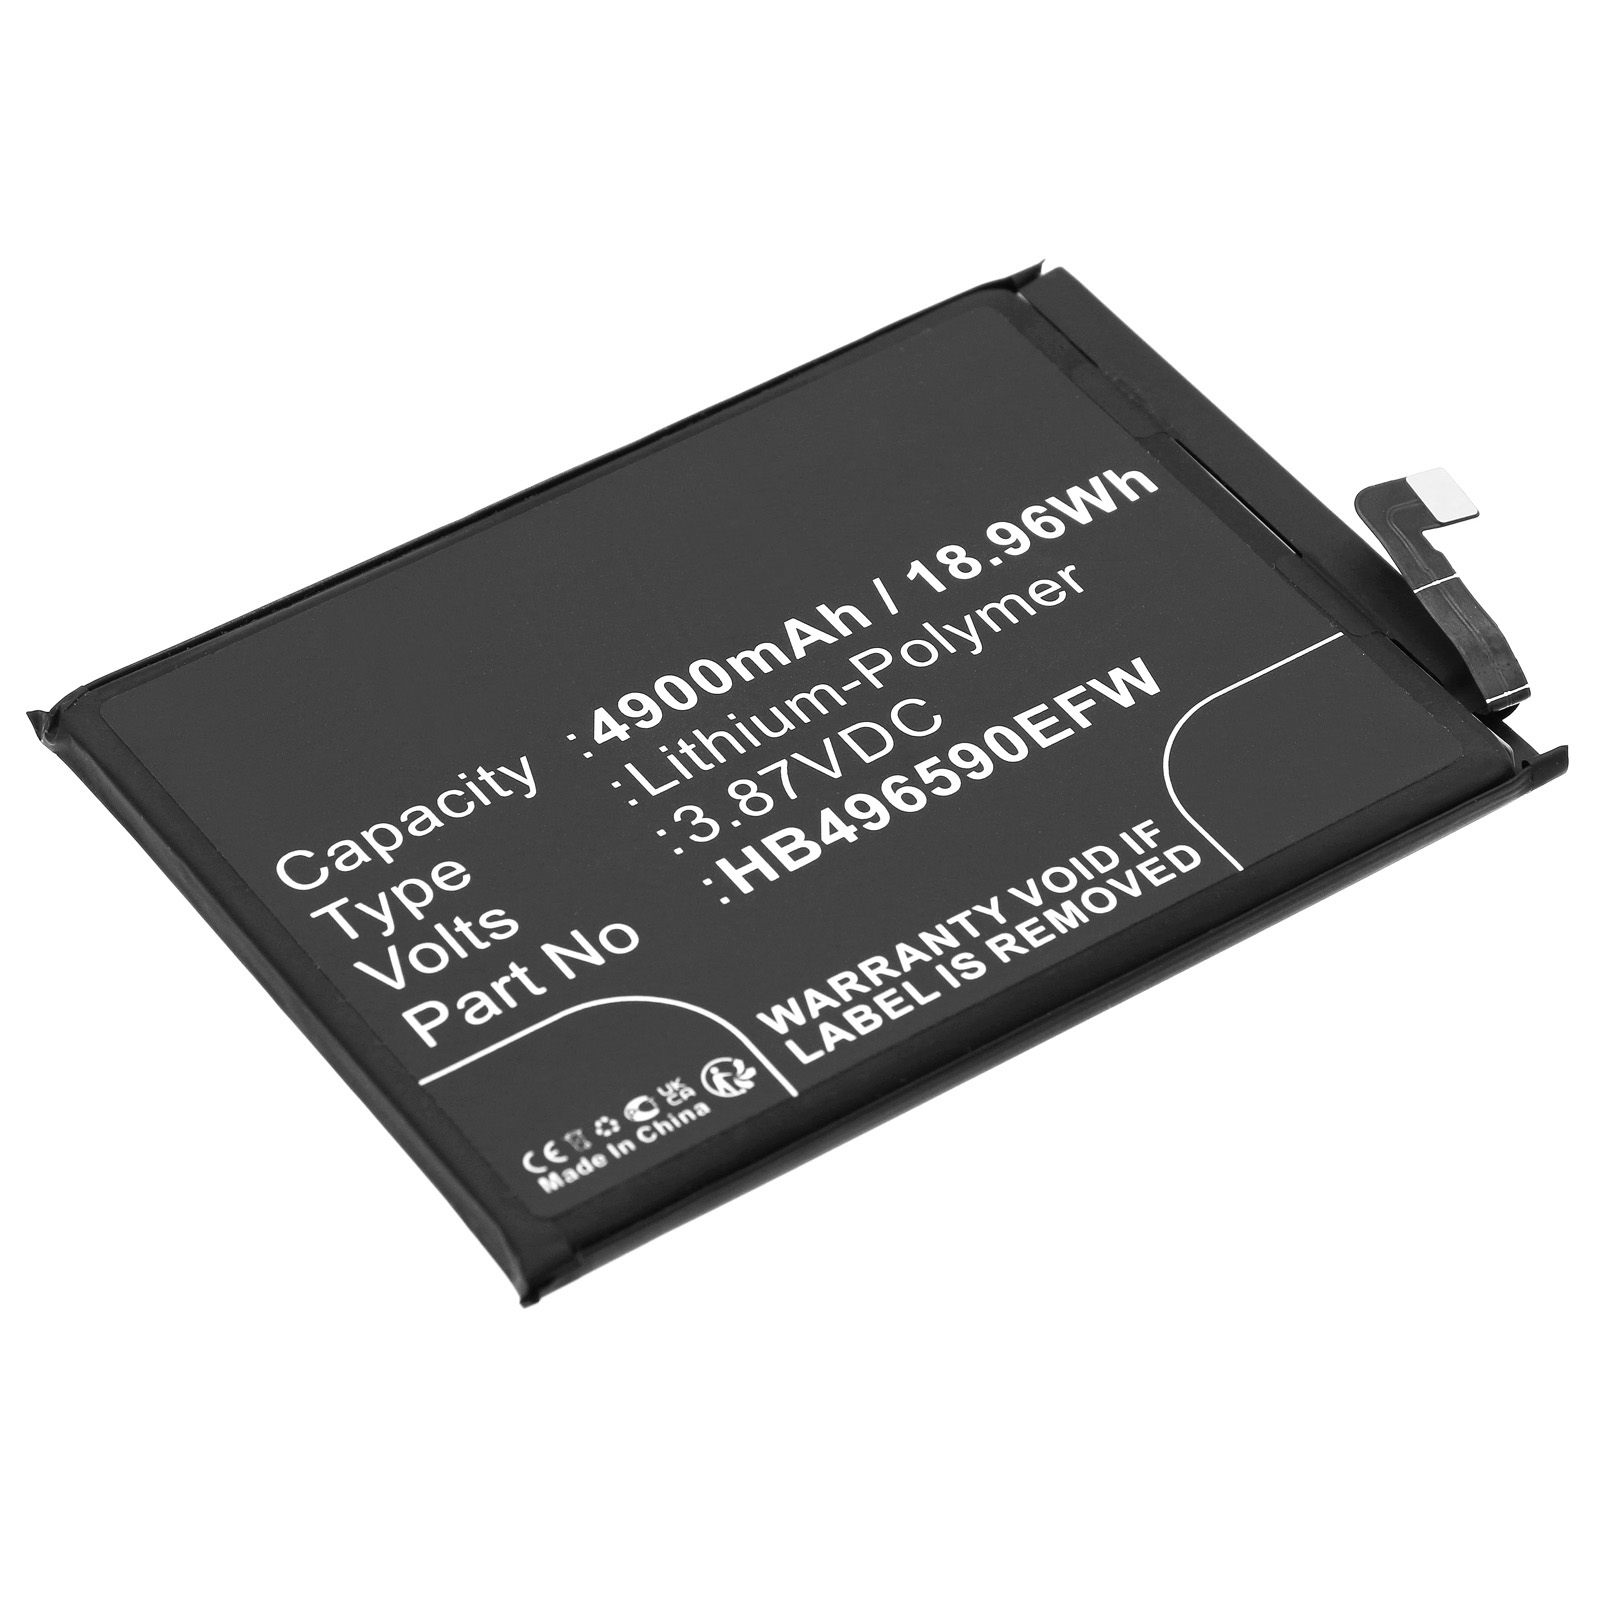 Synergy Digital Cell Phone Battery, Compatible with Honor HB496590EFW Cell Phone Battery (Li-Pol, 3.87V, 4900mAh)